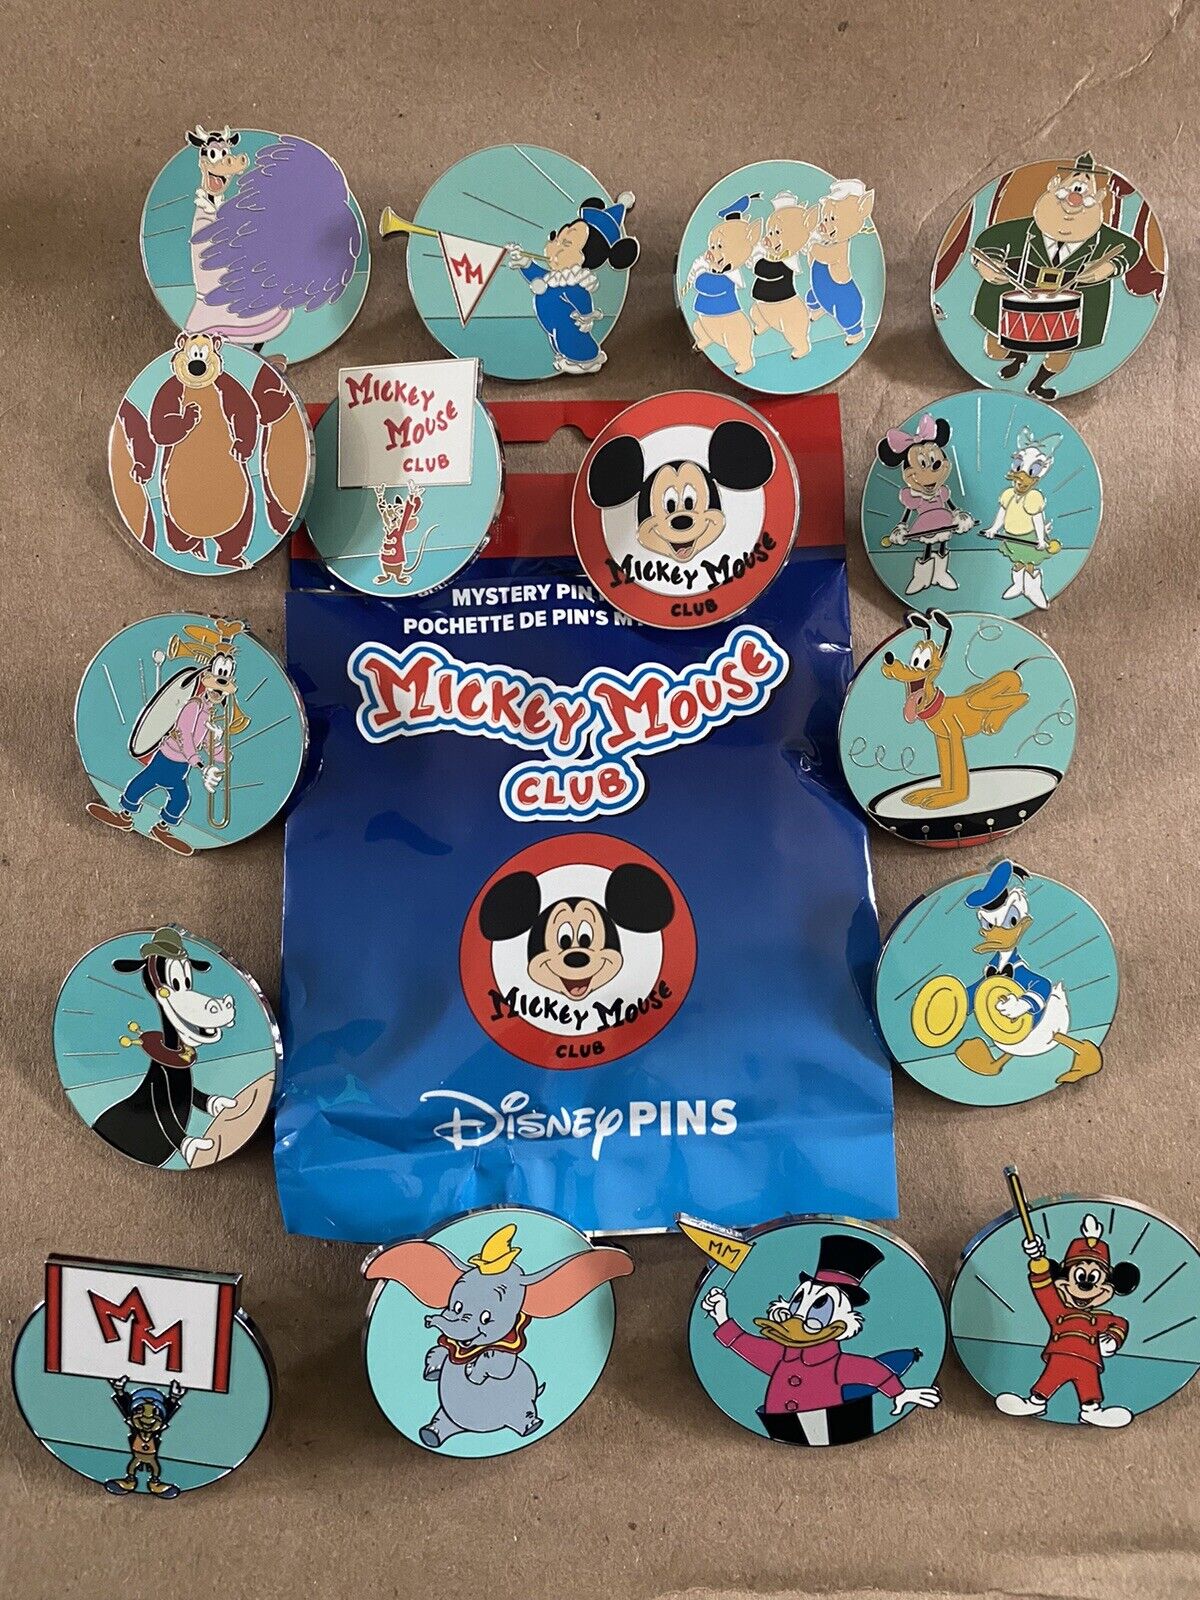 (16) Pin Set - The Mickey Mouse Club Mystery Pin Set